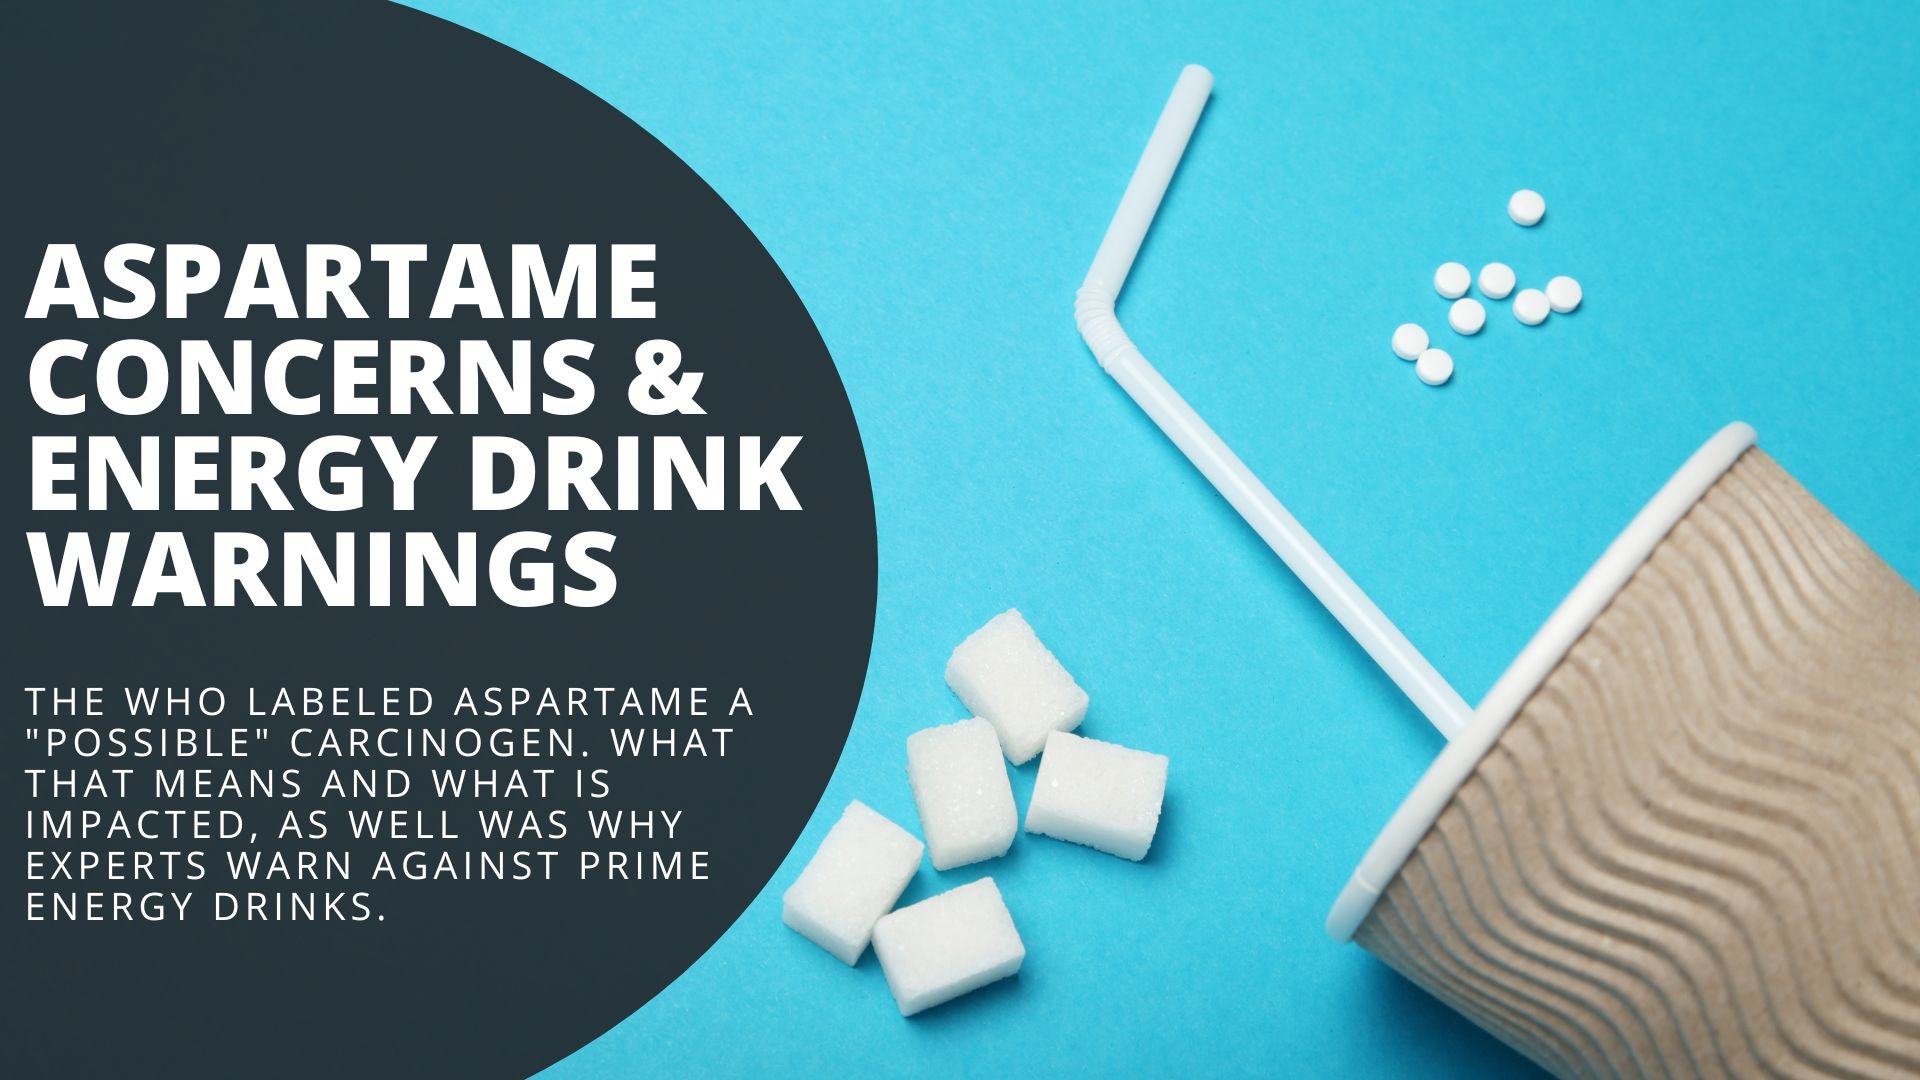 The WHO has labeled aspartame, an artificial sweetener, as a possible carcinogen. A closer look at what contains the sweetener and the warning over Prime drinks.